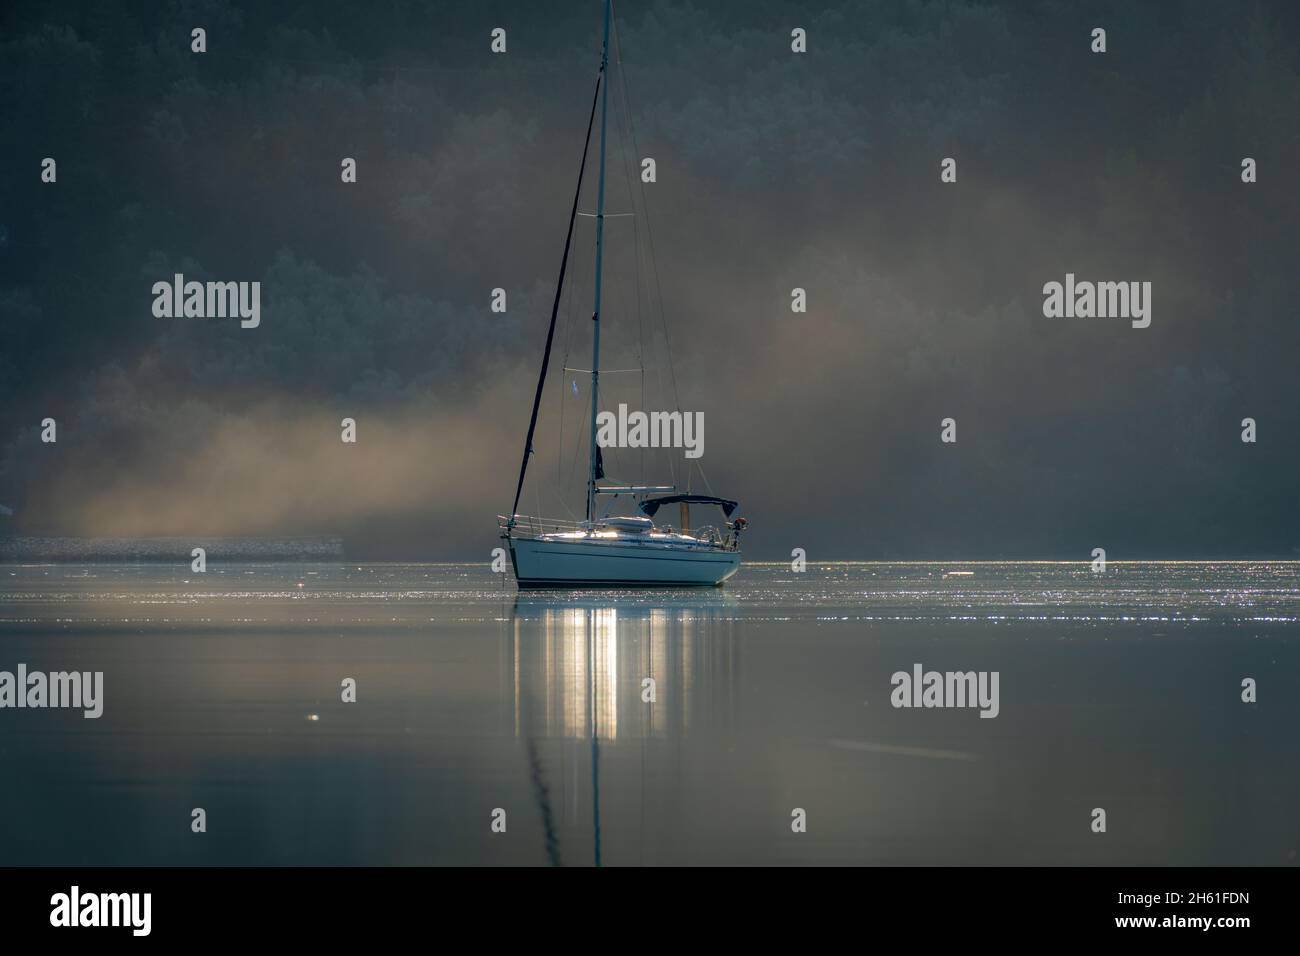 A sailing boat on the calm water of a sheltered bay casting reflections with morning mist on the sea surface. Stock Photo